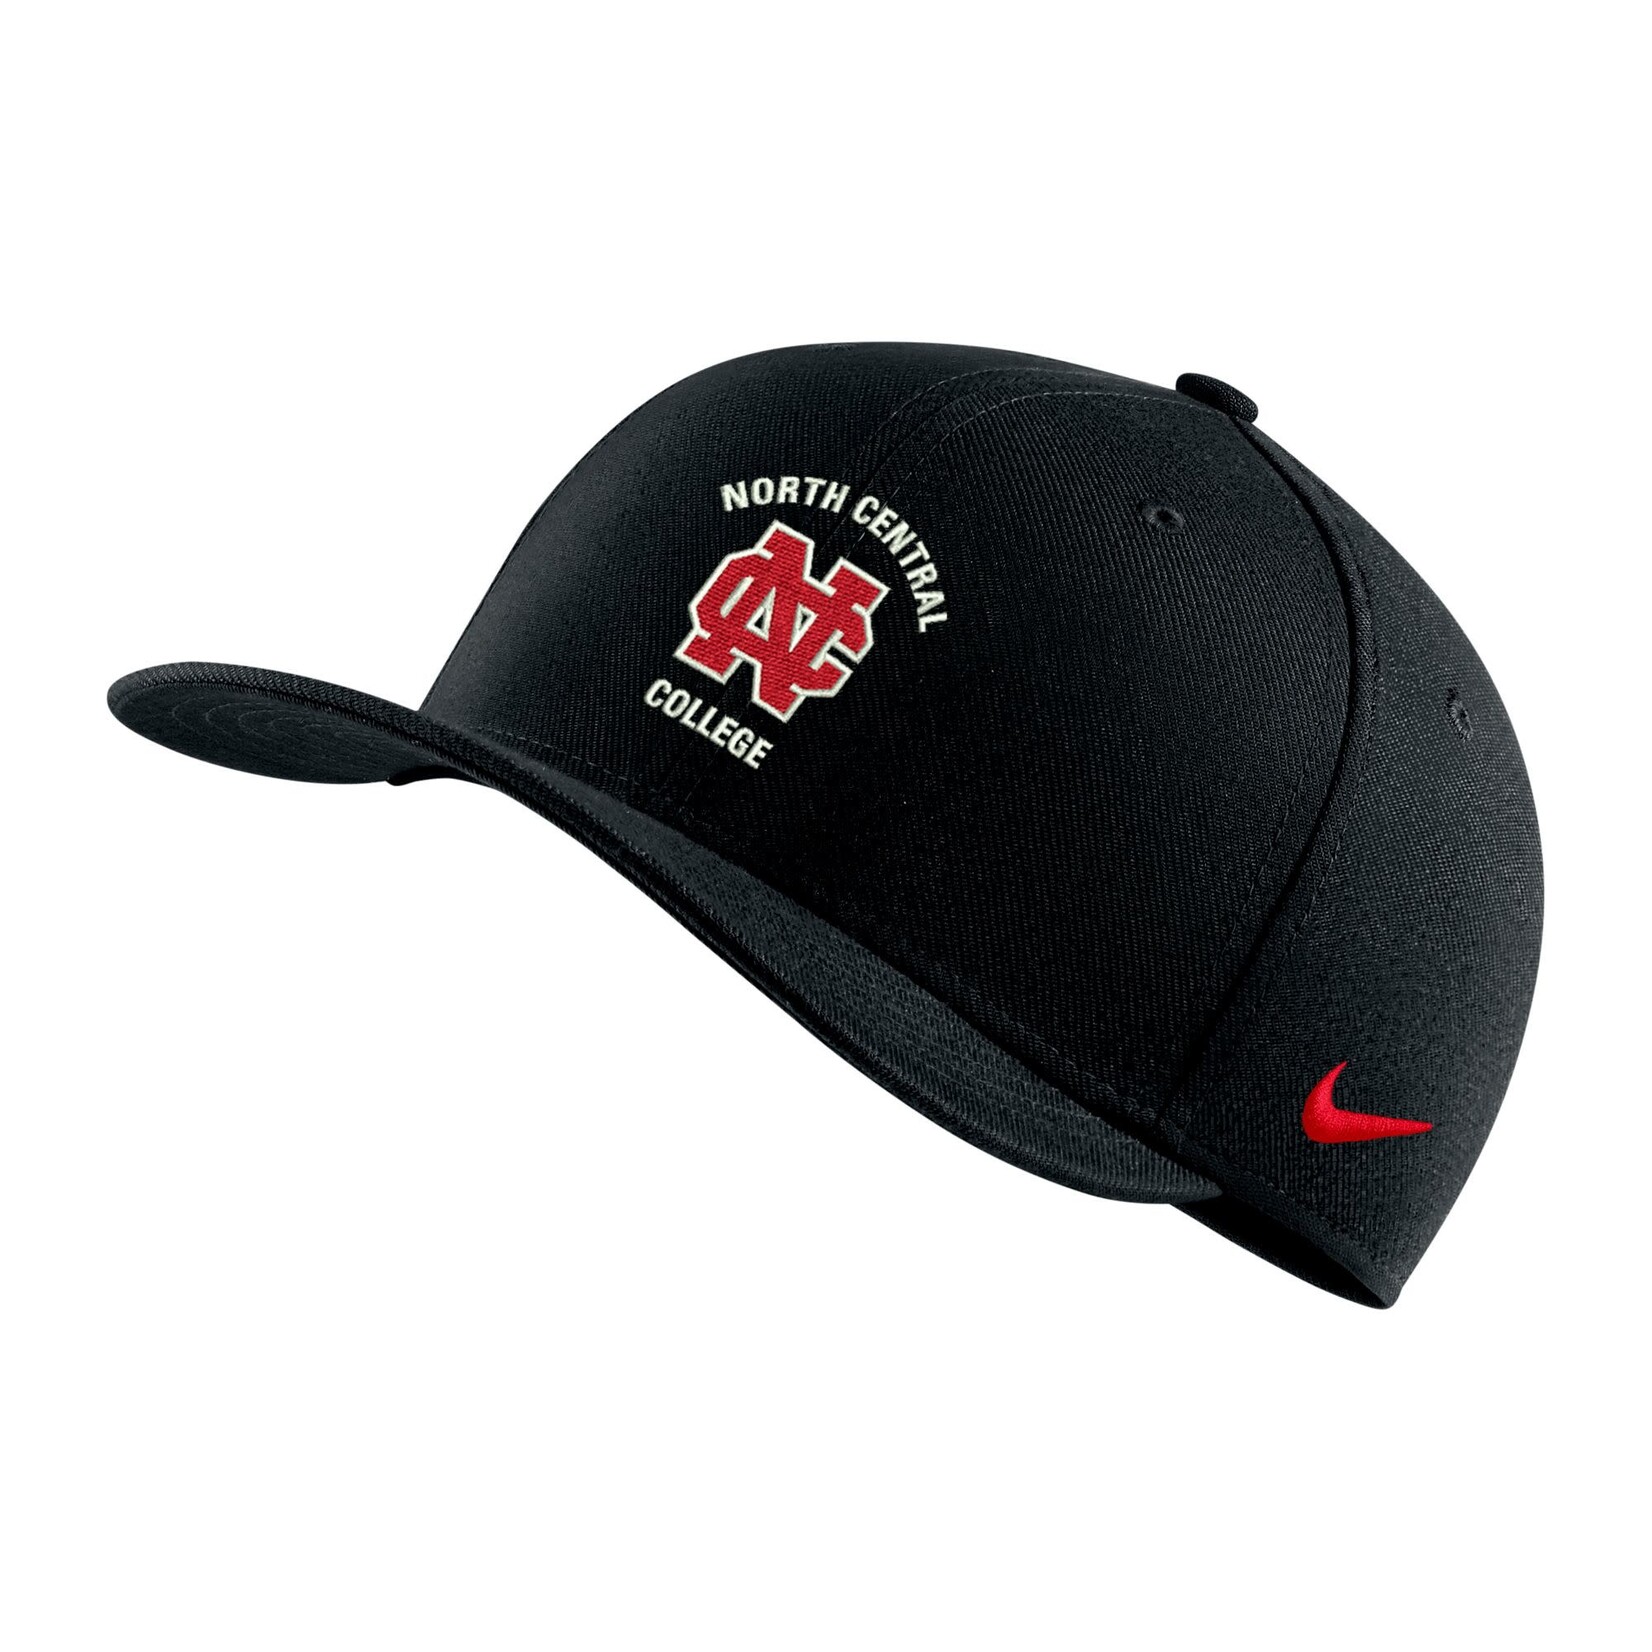 Nike North Central College Swoosh Flex Classic Hat by Nike